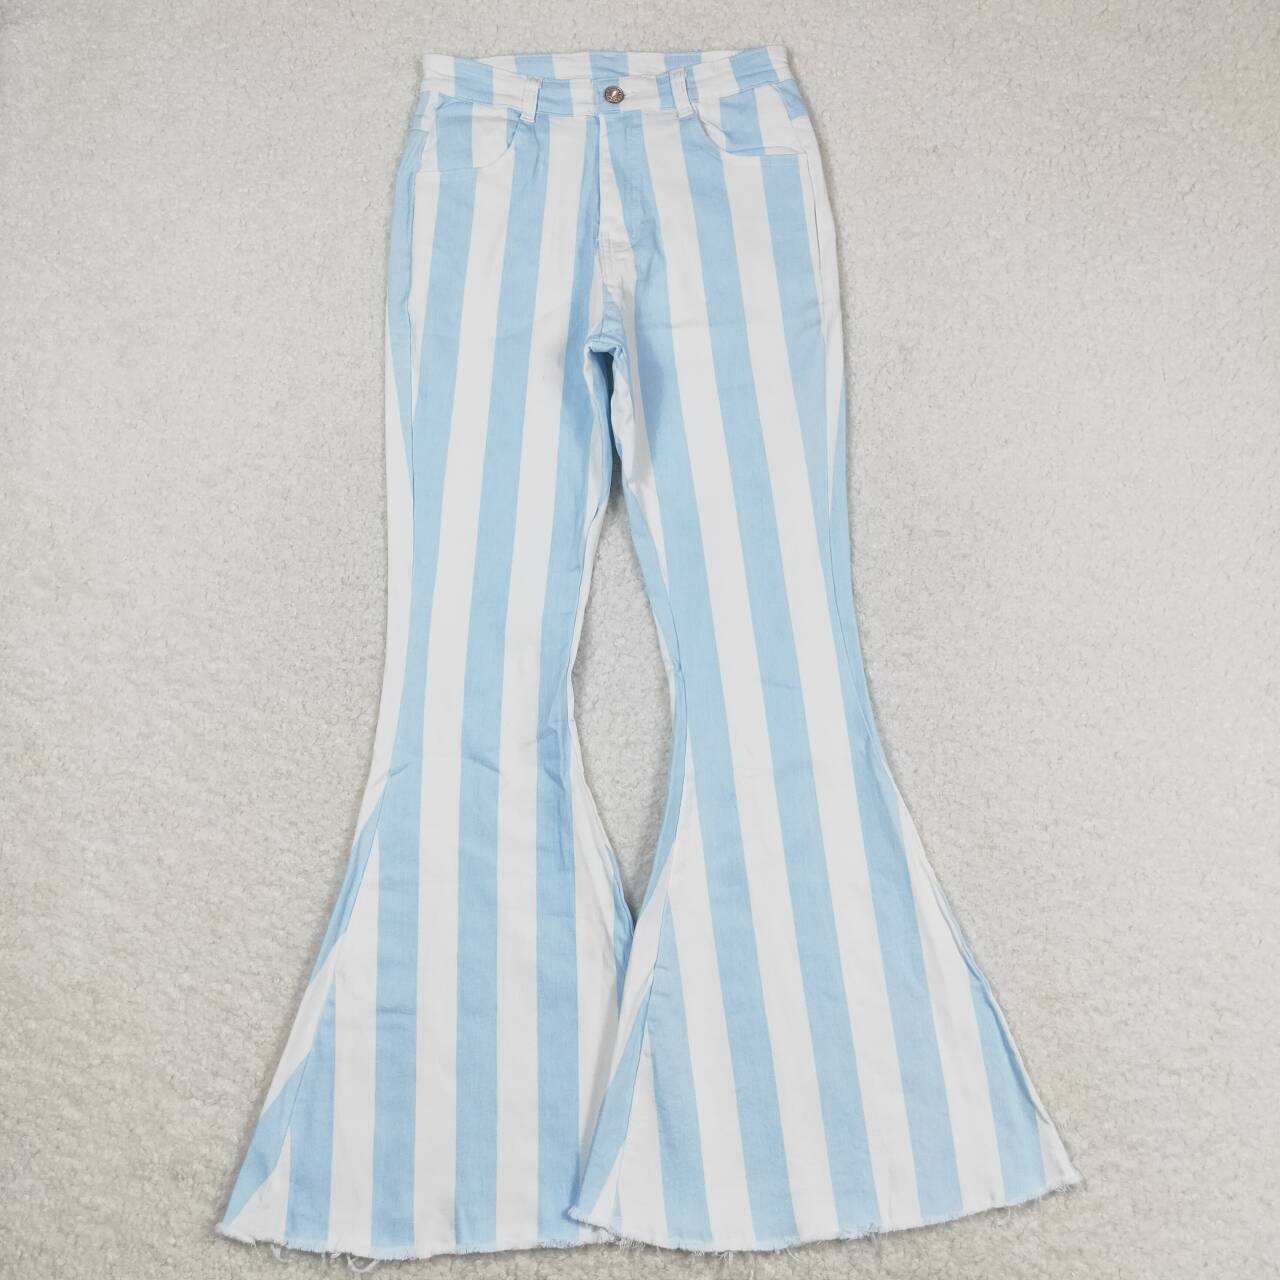 Mommy and Me Matching Jeans- Blue Stripes Denim Bell Bottom Pants